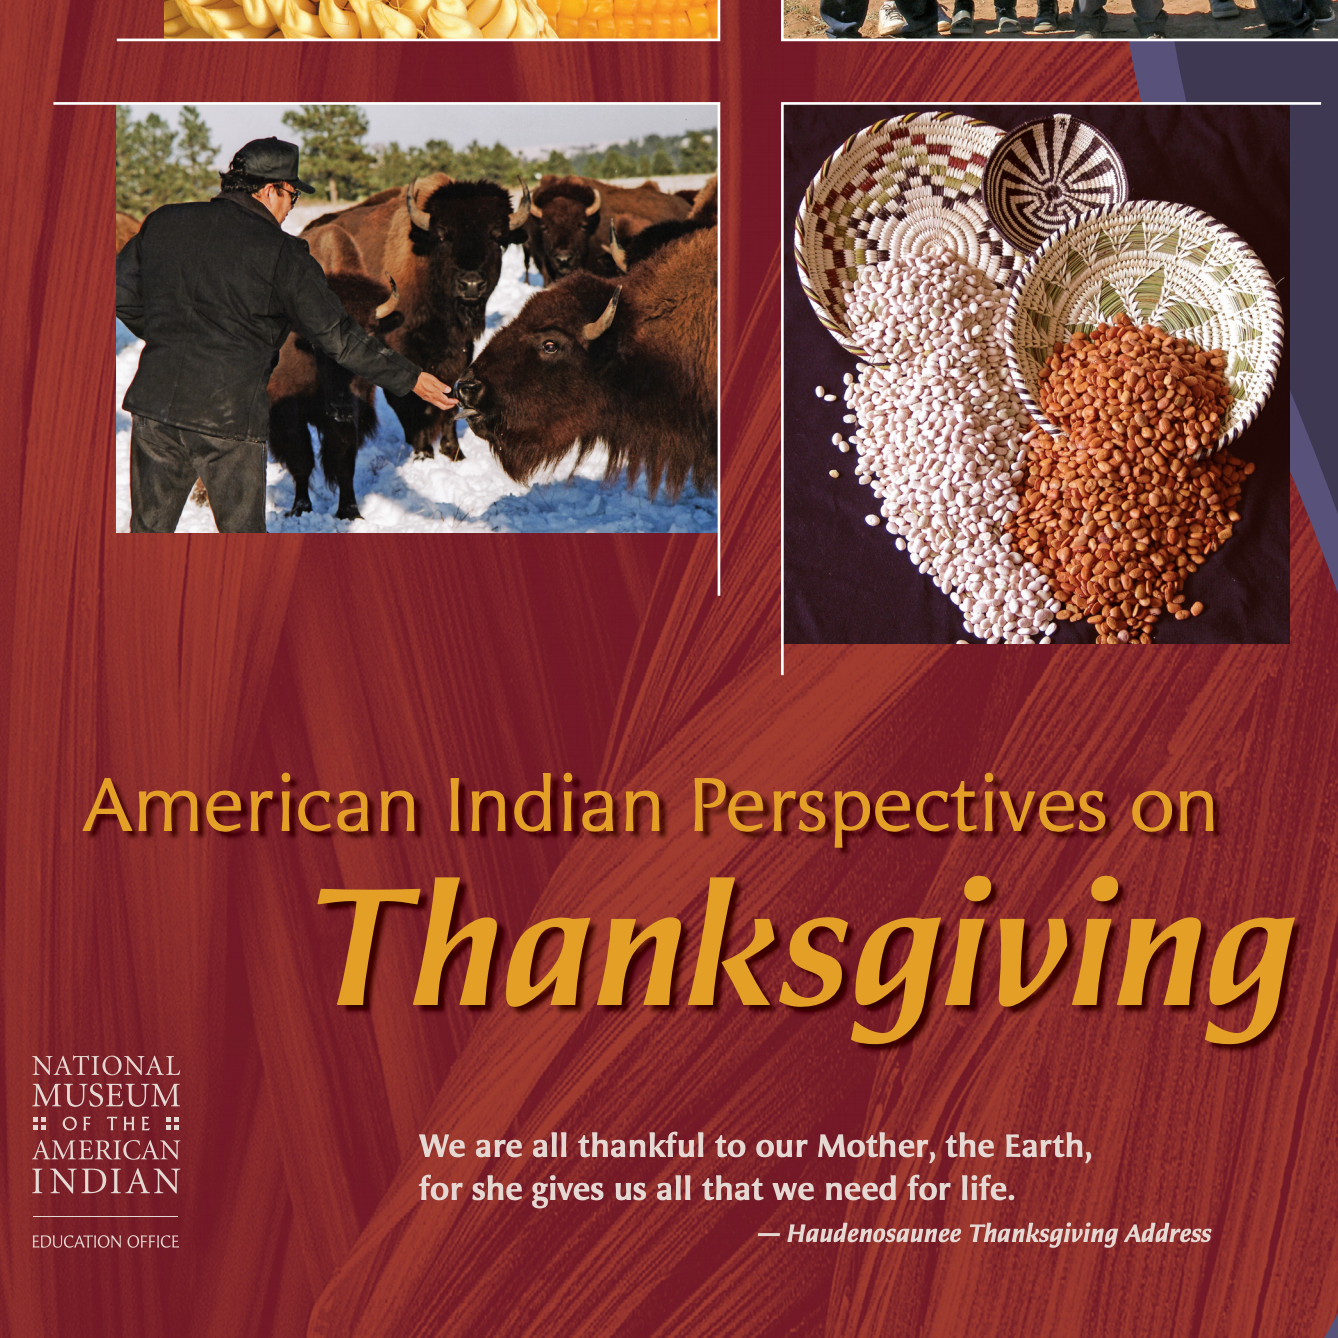  This resource from the National Museum of the American Indian is intended for teachers of grades 4-8, but there is great information for parents of children of all ages as well. 